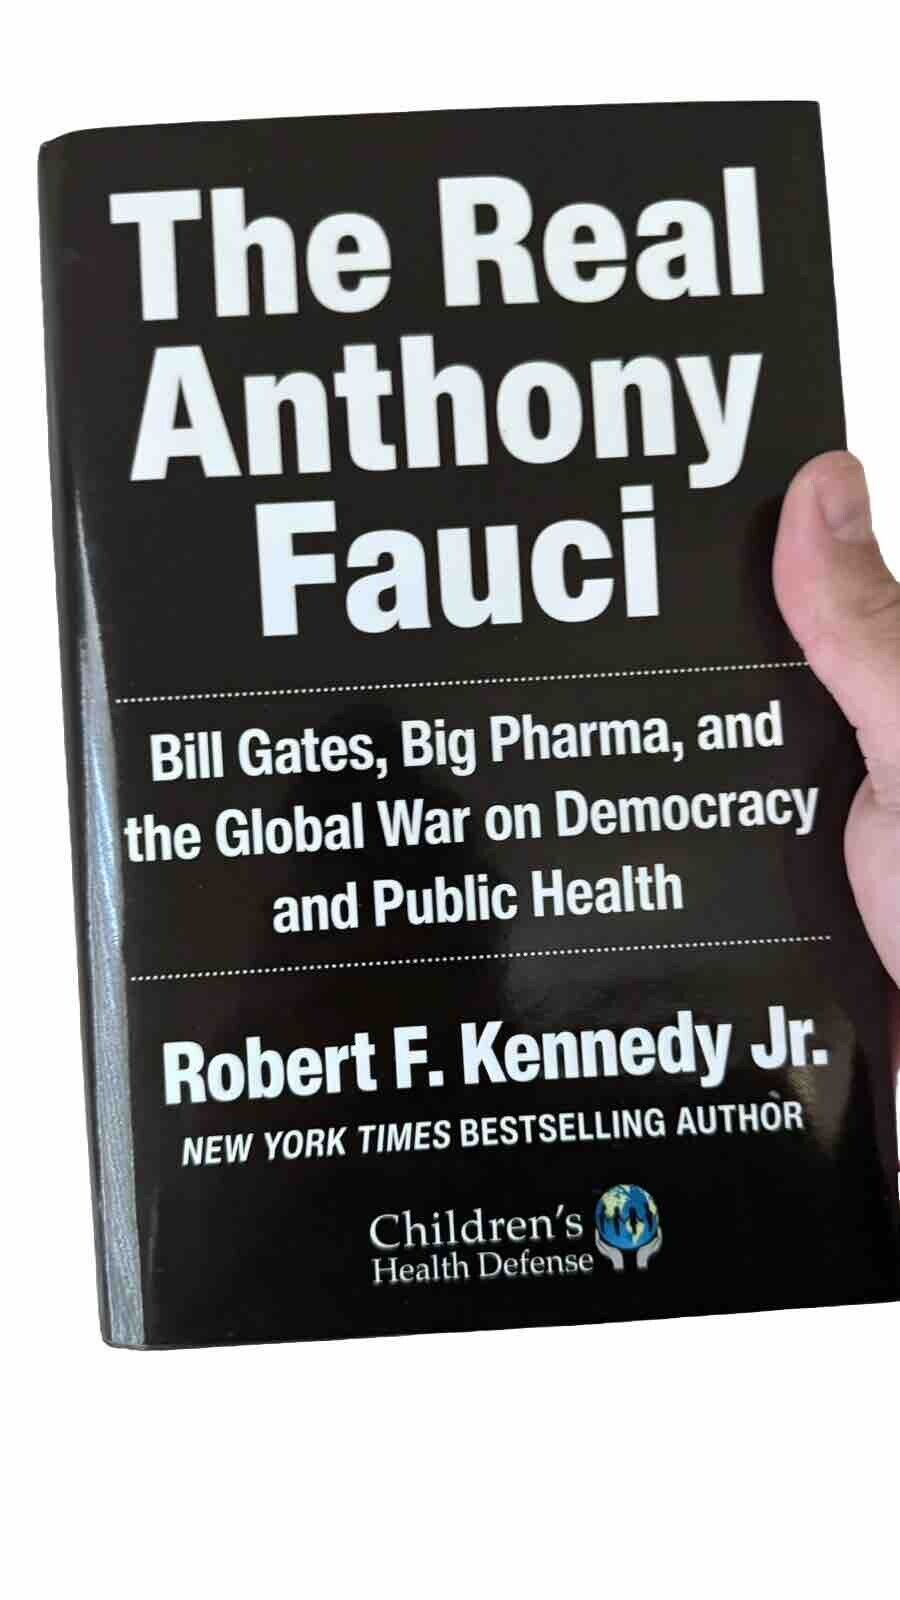 Robert F Kennedy Jr RFK Jr Signed The Real Anthony Fauci Book PSA/DNA COA